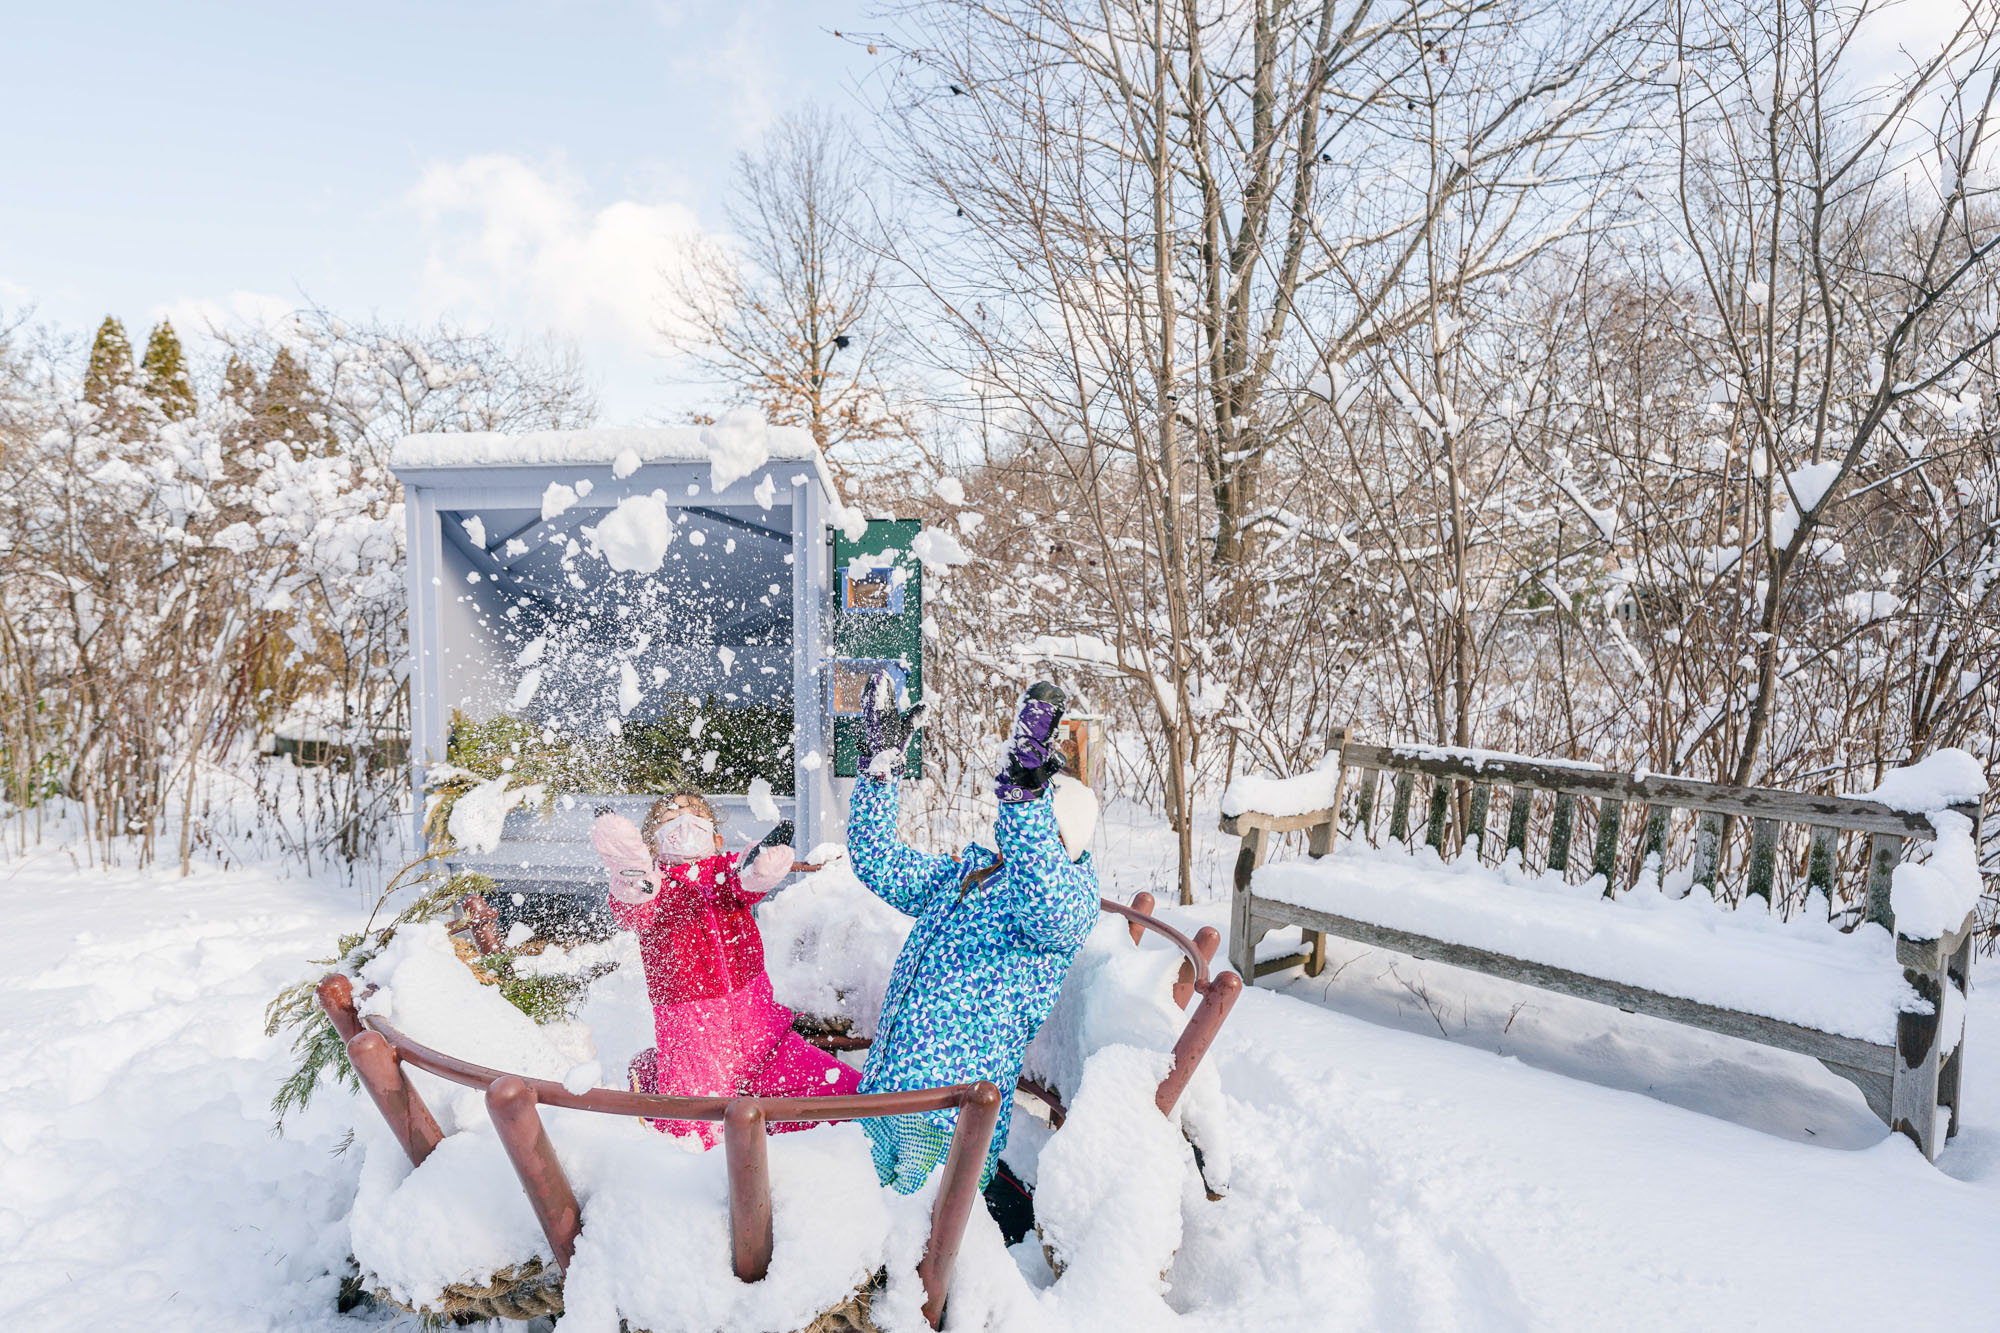 Children in blue and pink parkas throw snow up into the air